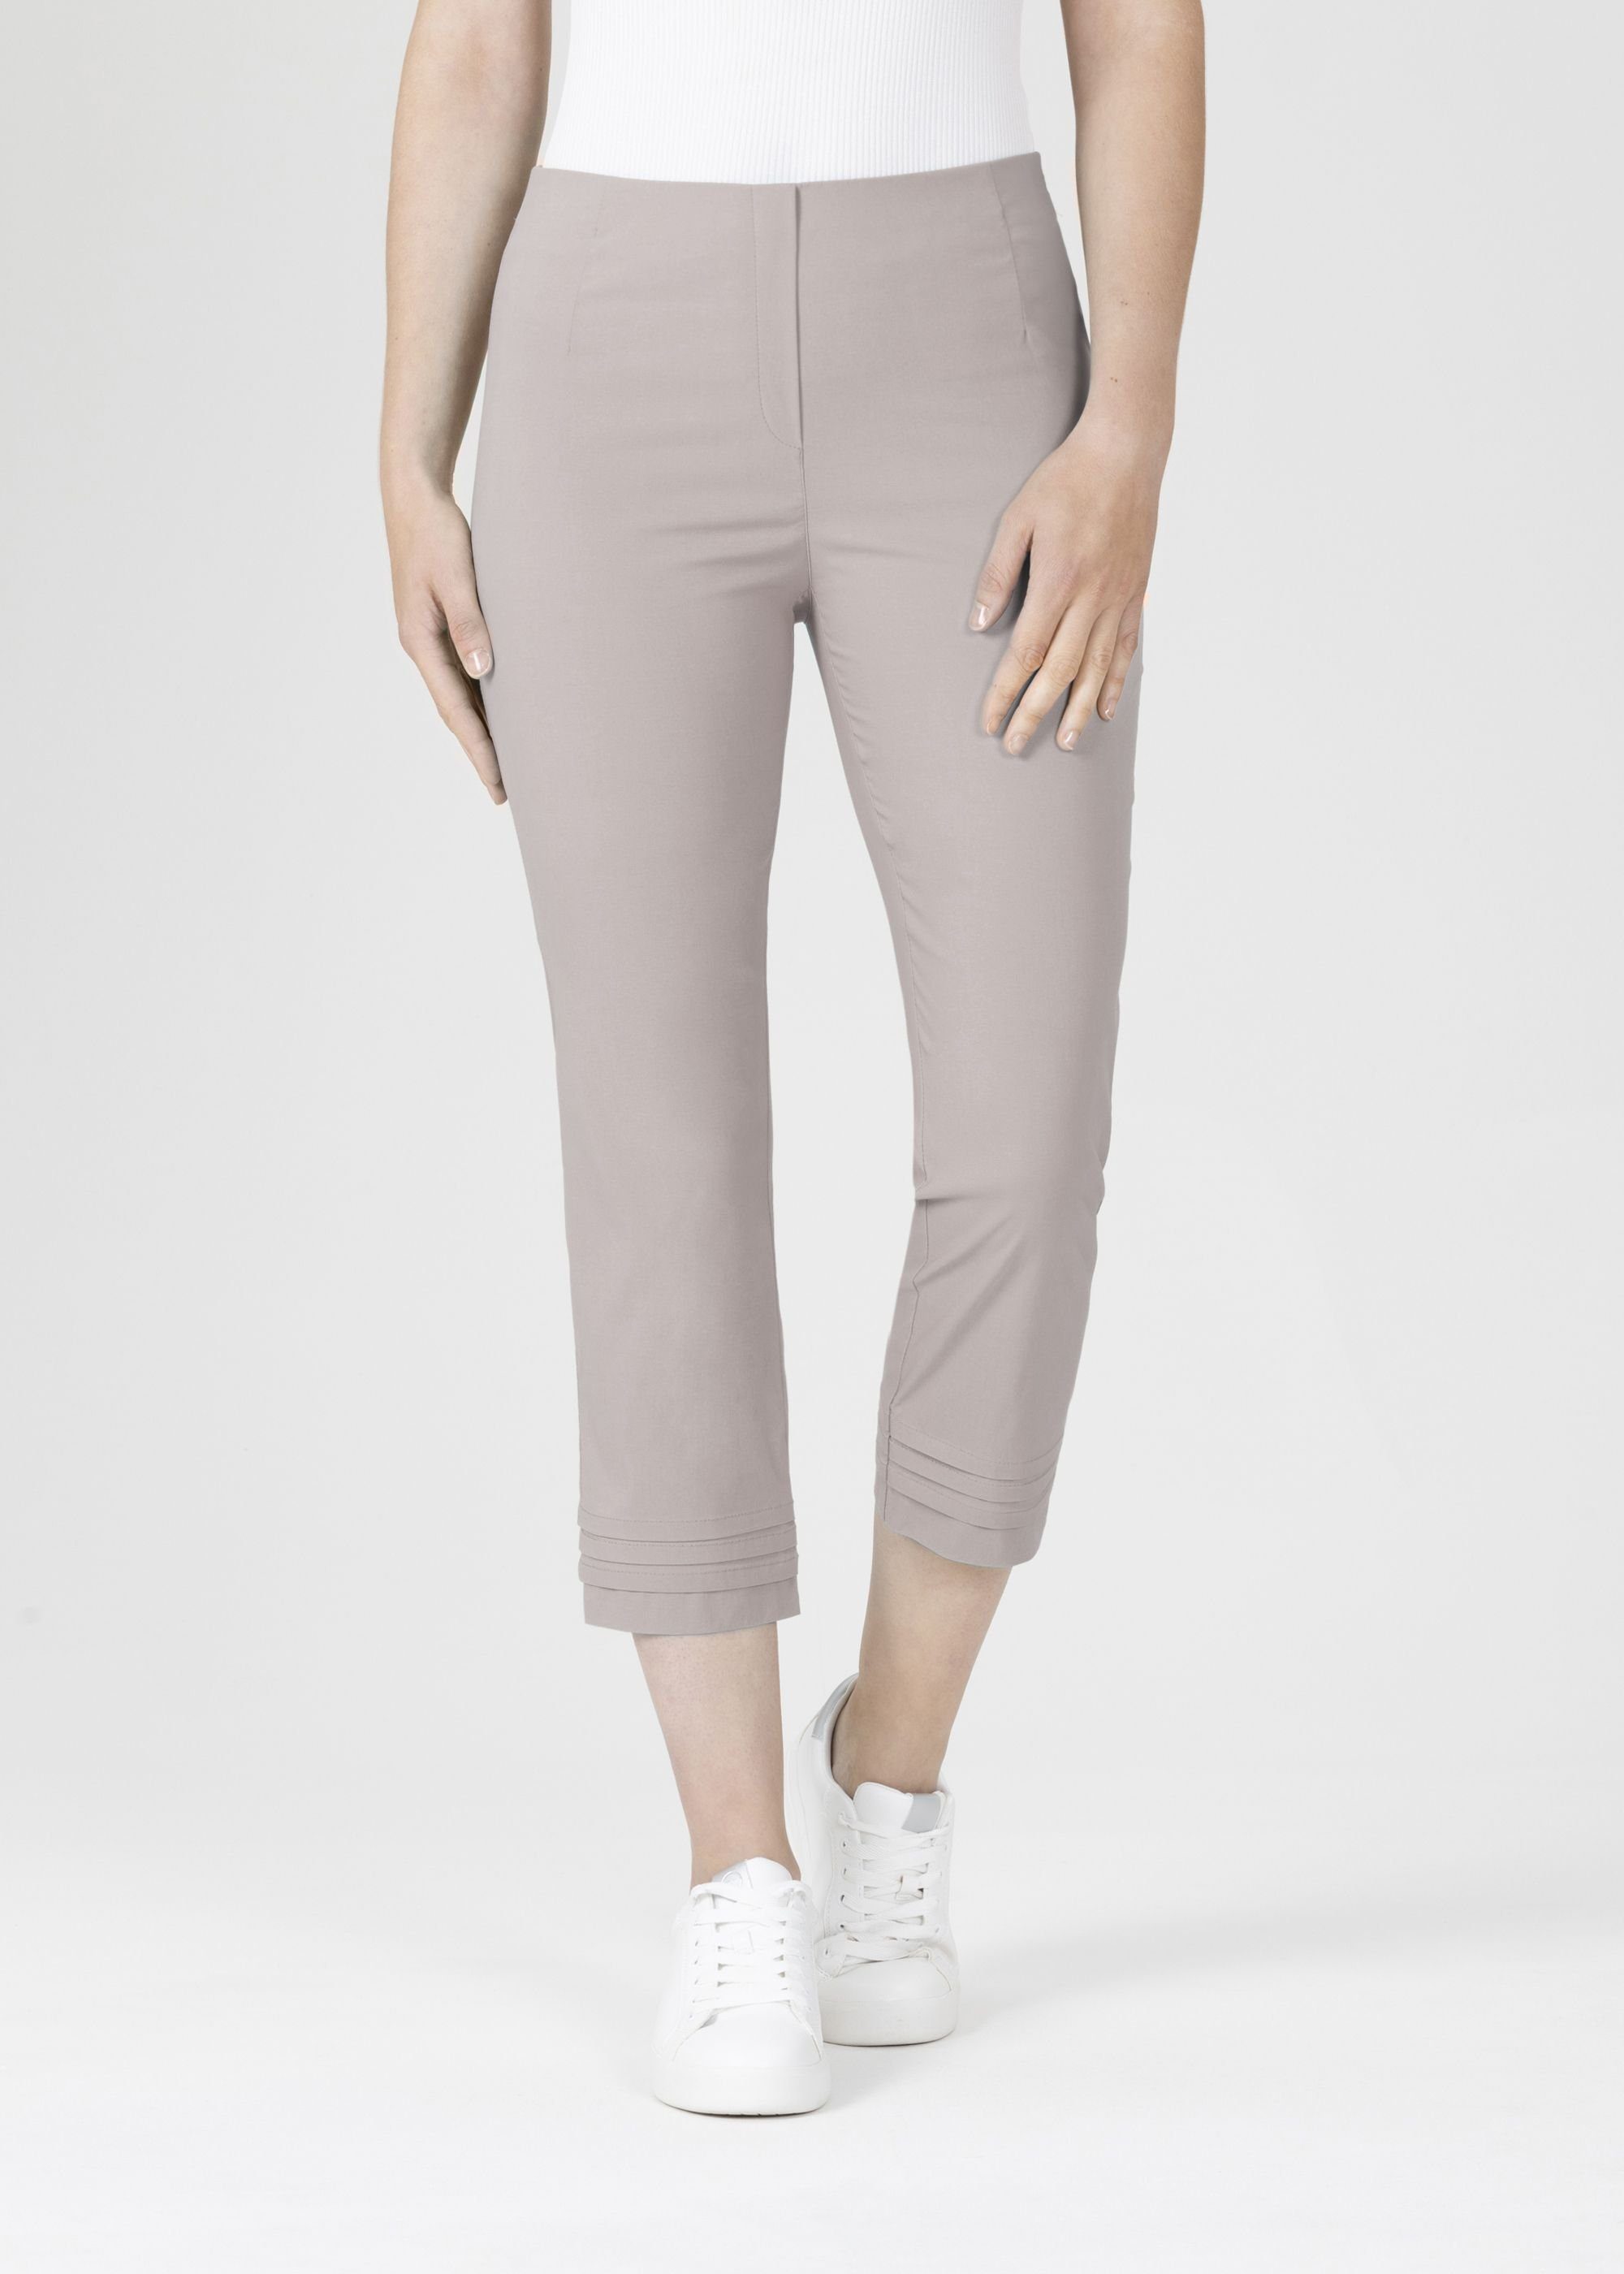 Stoffhose Ina simply Stehmann mit taupe Faltendetails